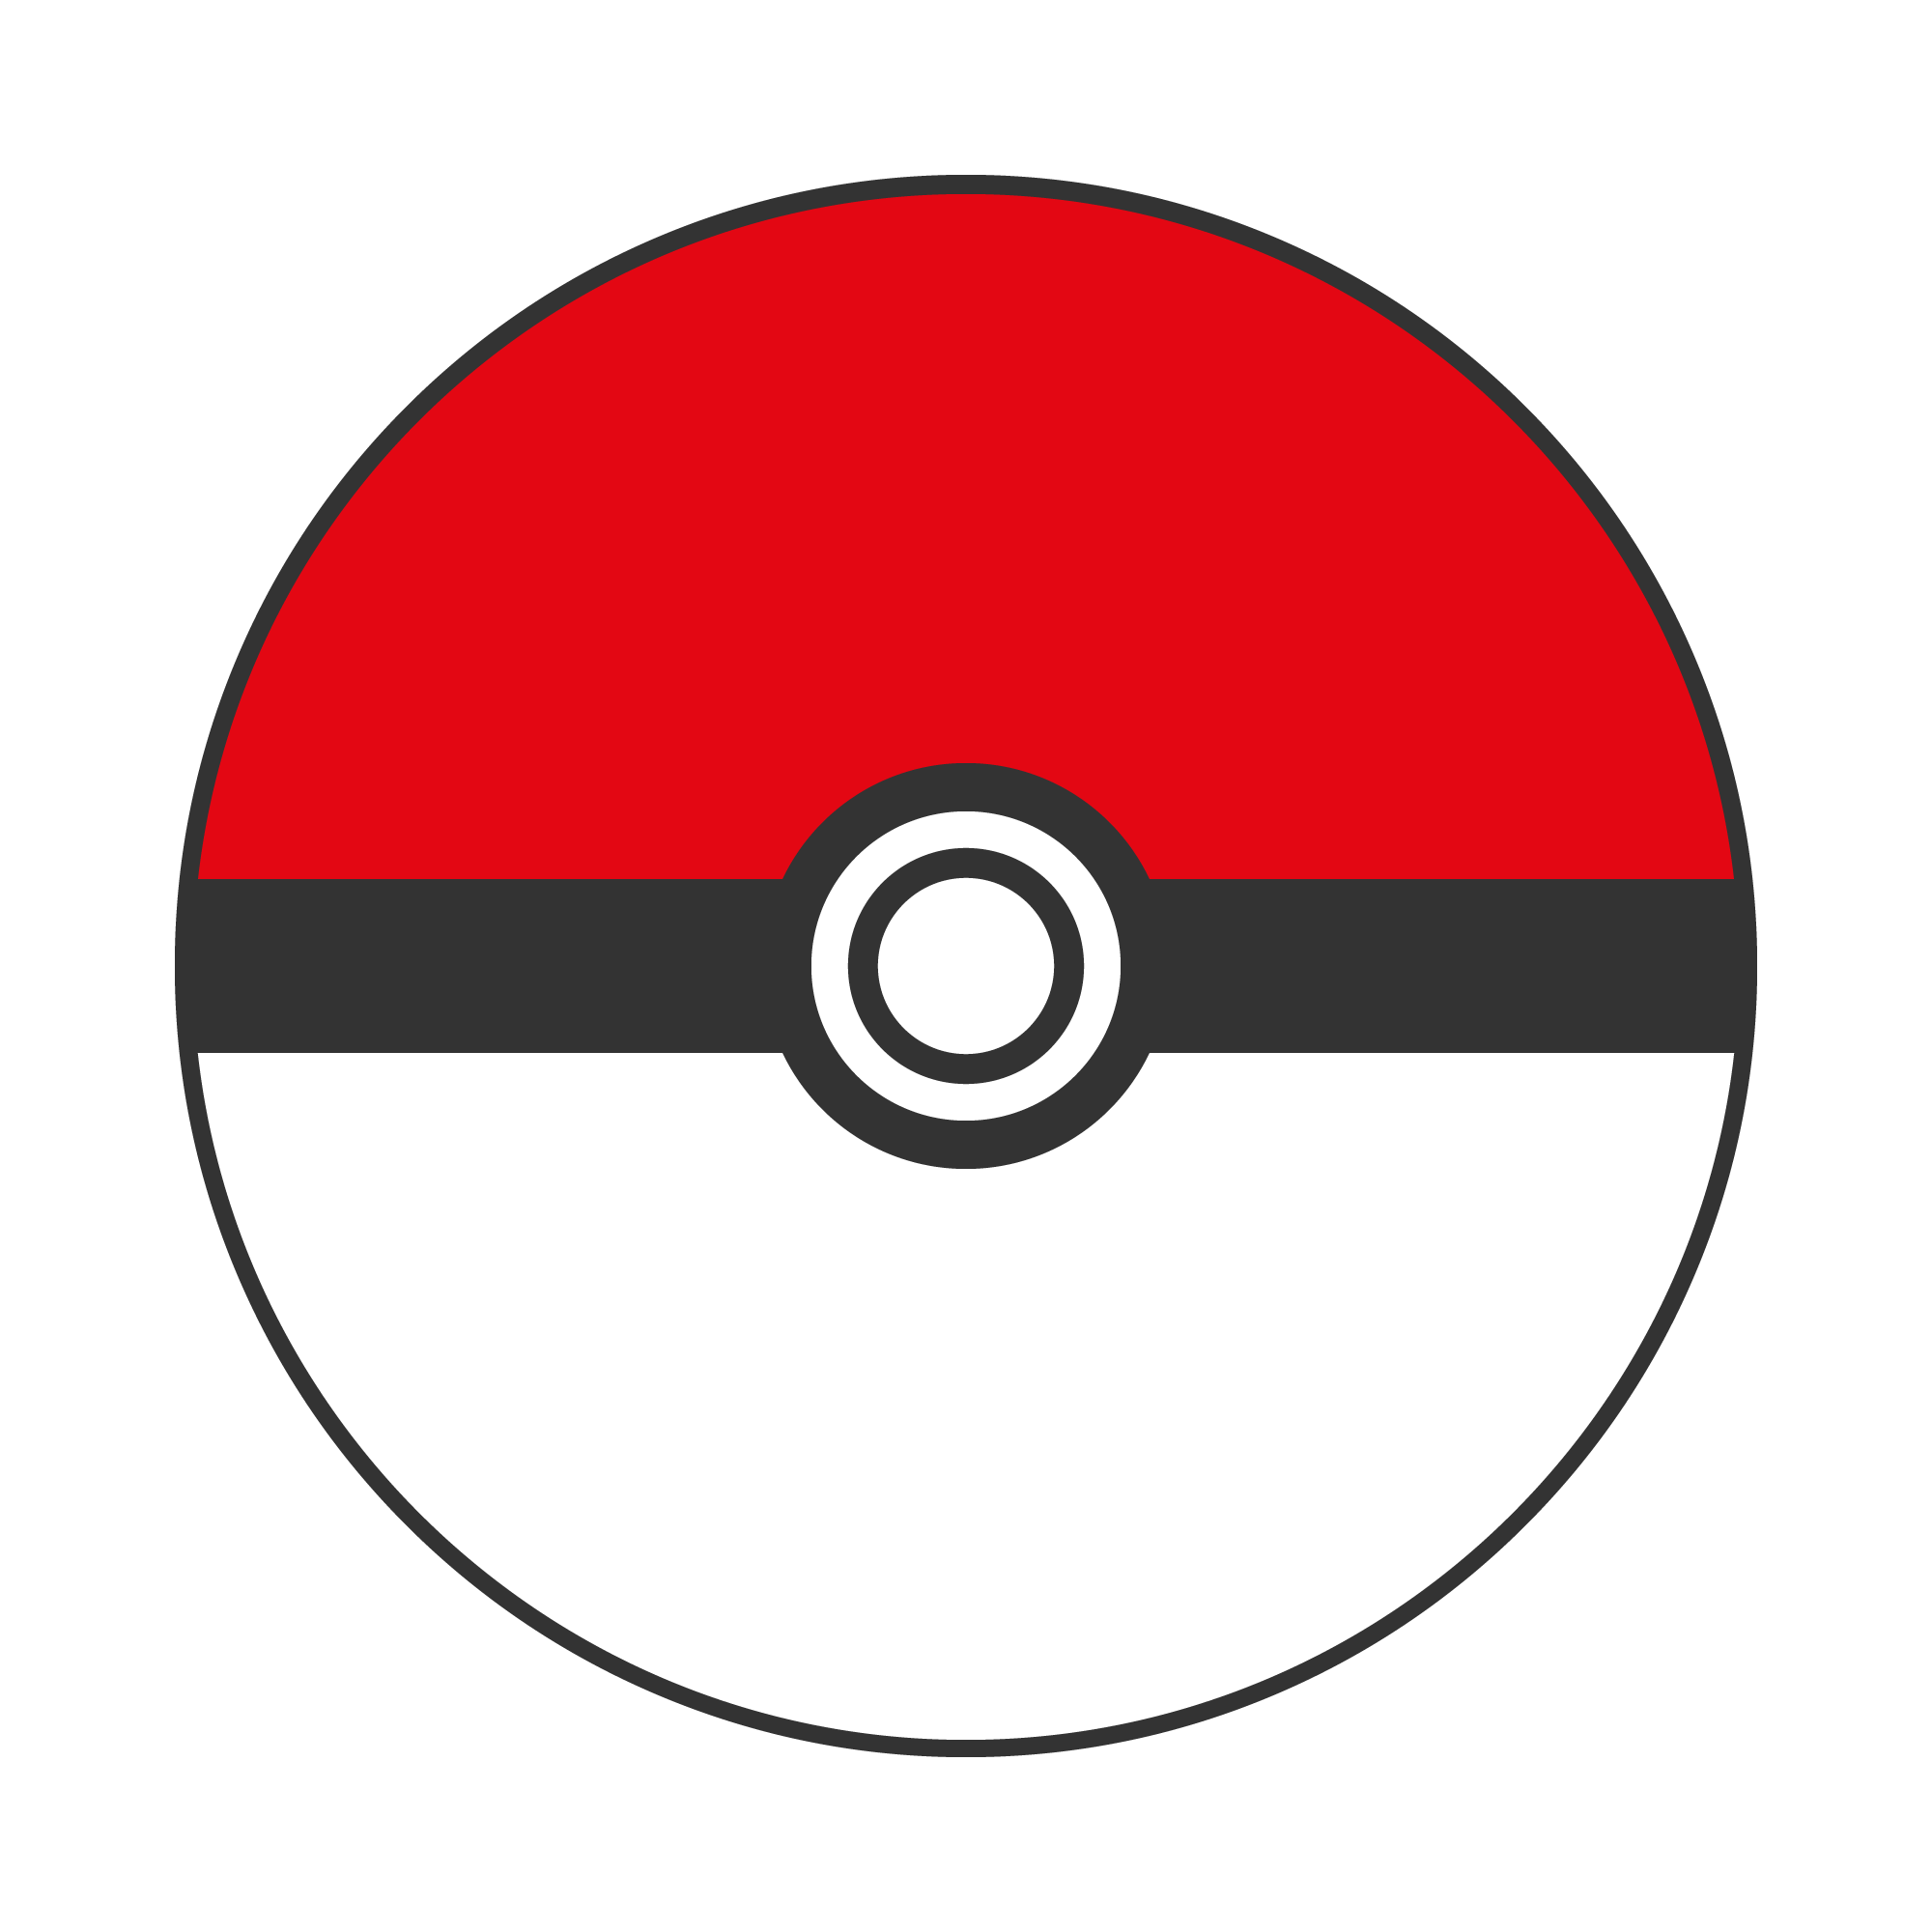 Pokeball Pokemon Ball Red Clipart Png Transparent Background Free